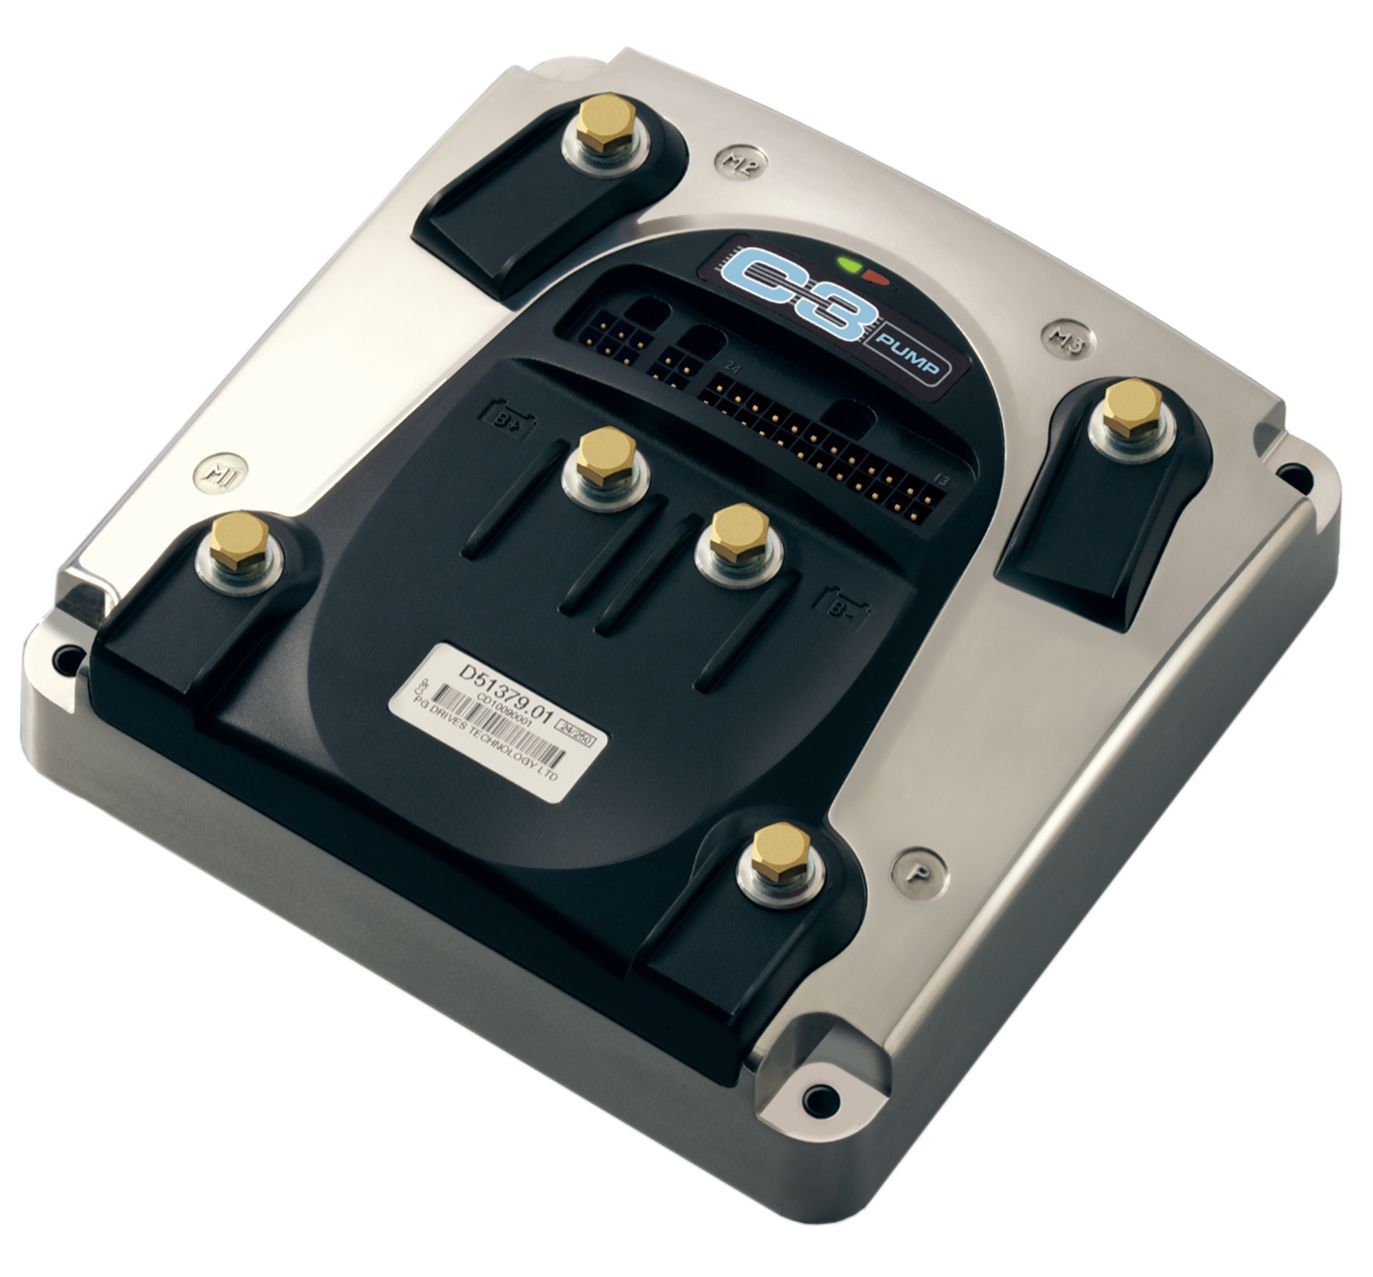 The PG Drives Technology C3pump motor controller from Curtiss-Wright